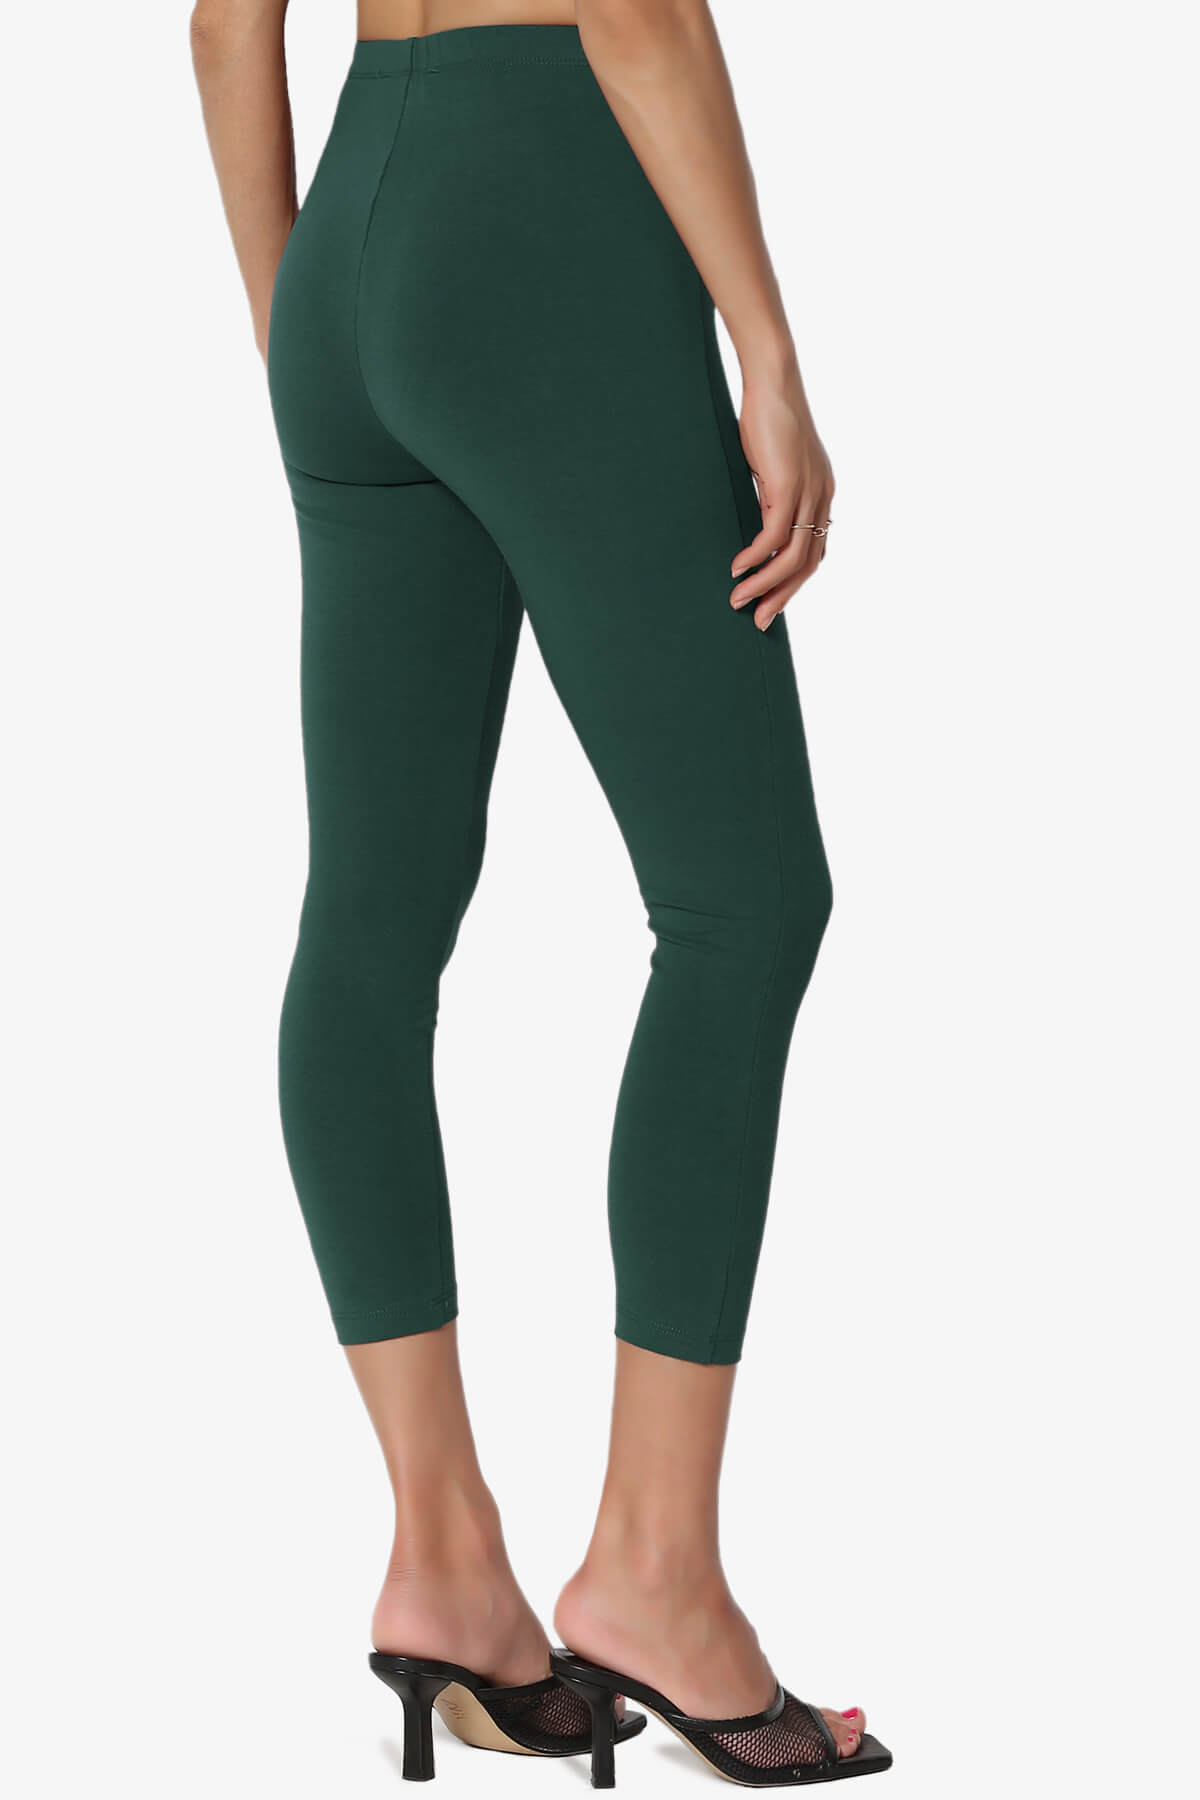 Load image into Gallery viewer, Ansley Luxe Cotton Capri Leggings HUNTER GREEN_4
